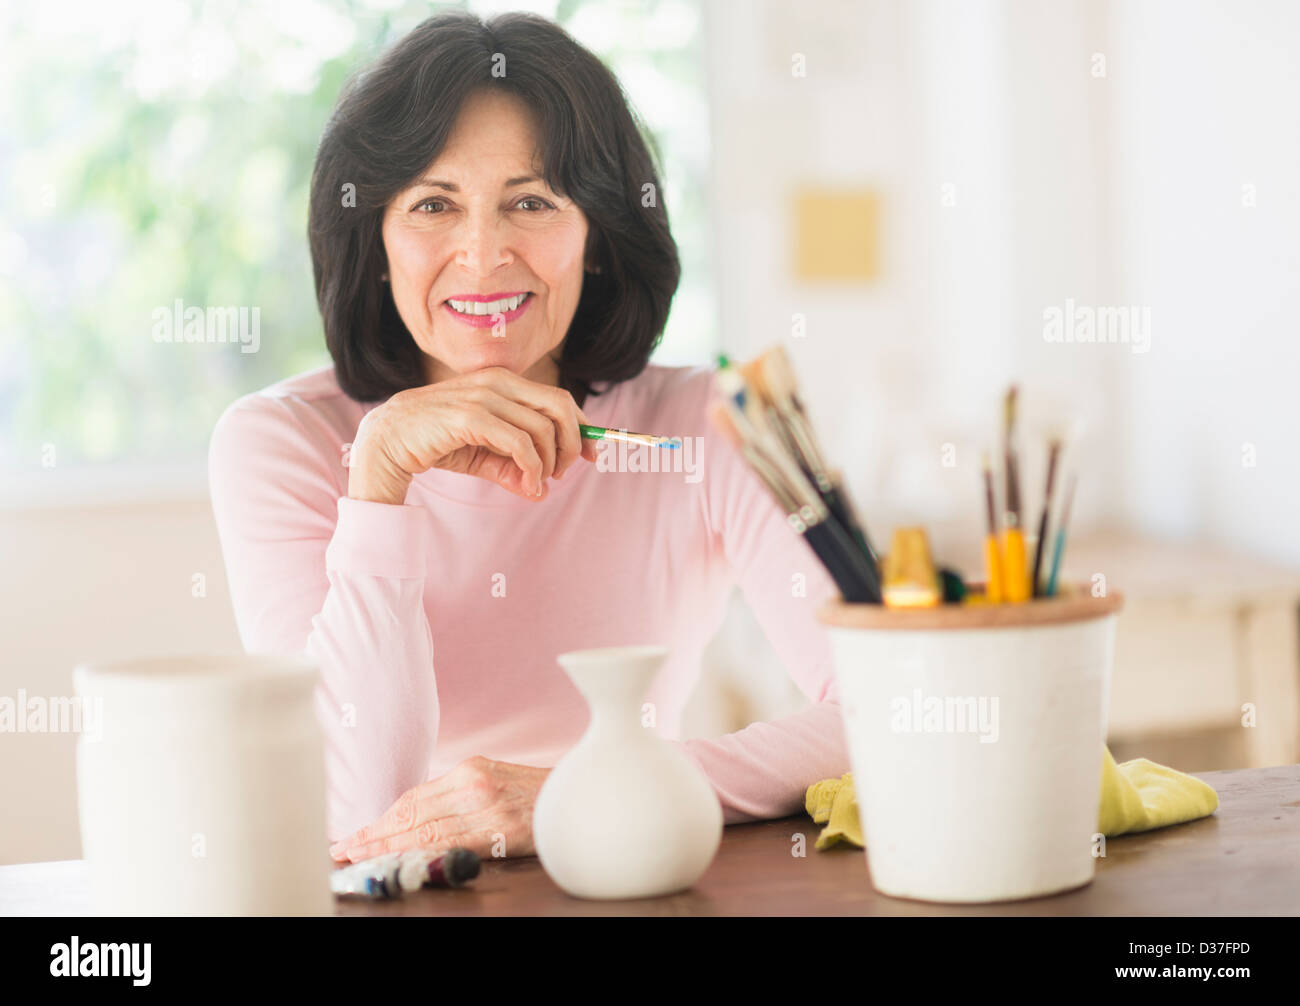 USA, New Jersey, Jersey City, Senior woman painting poterie fait main Banque D'Images